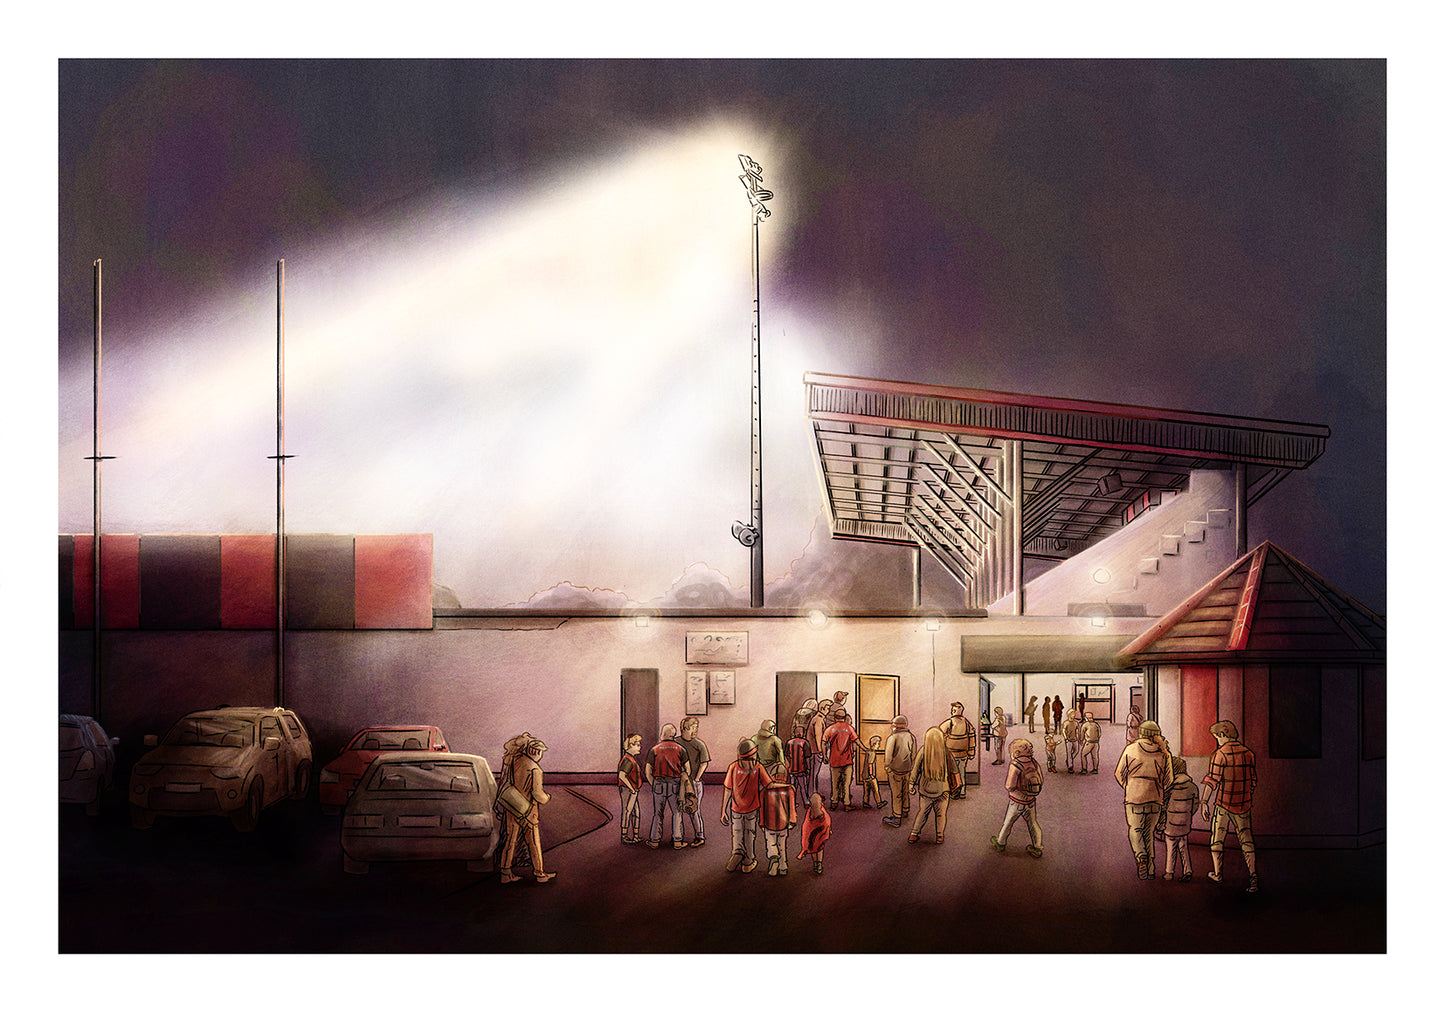 Longford Town Match Night Limited Edition Print